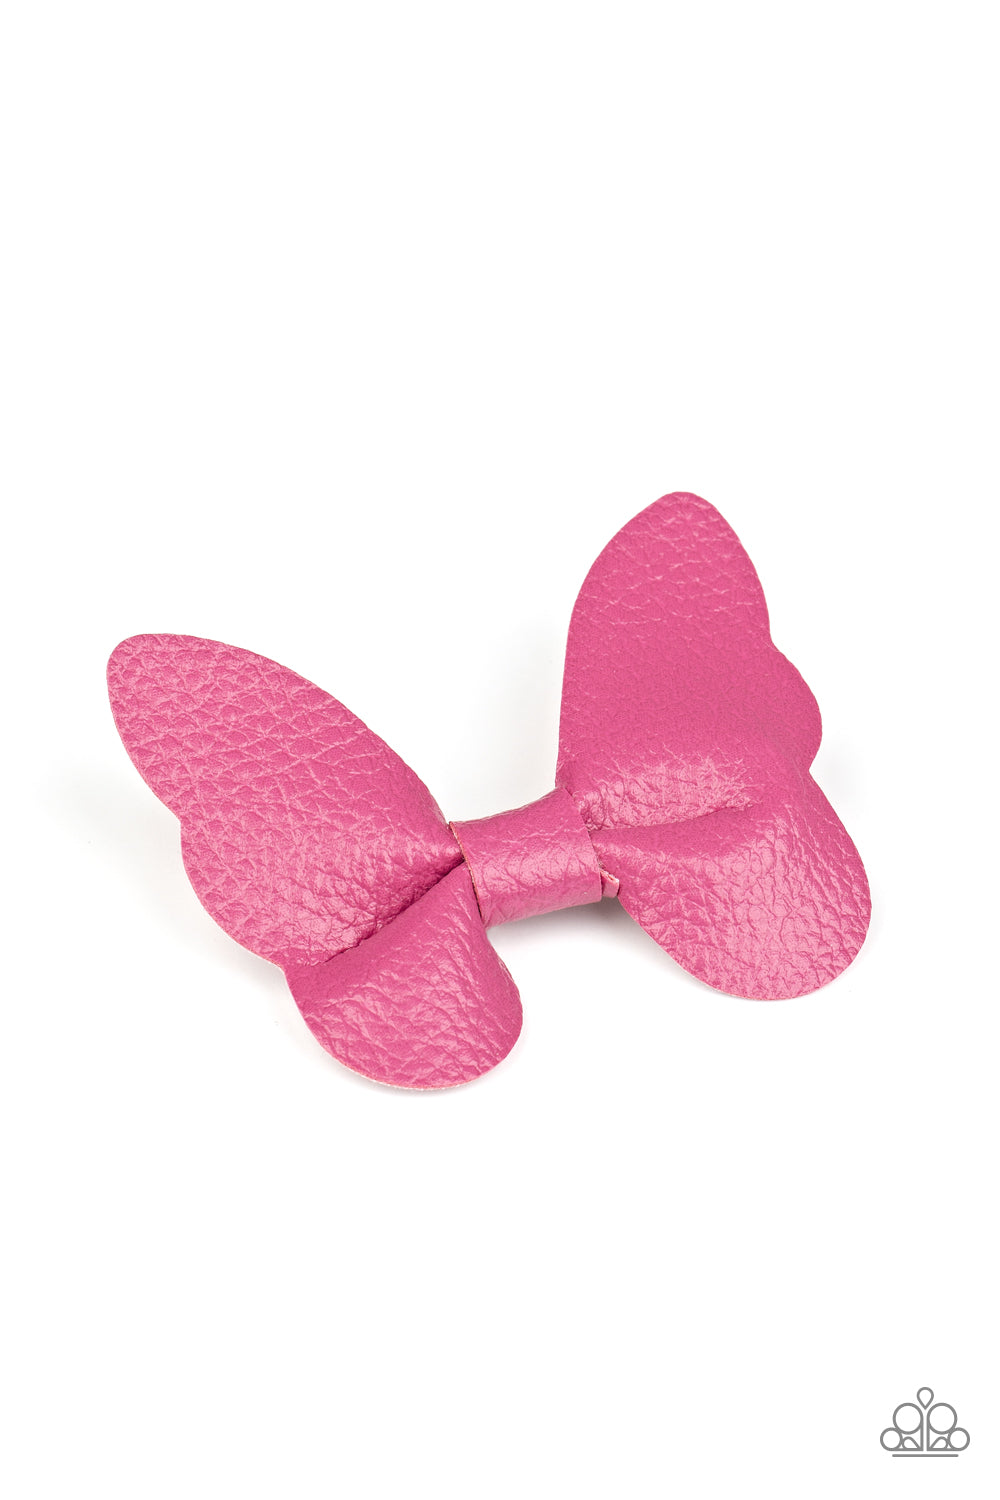 Paparazzi Butterfly Oasis - Pink Hair Accessory